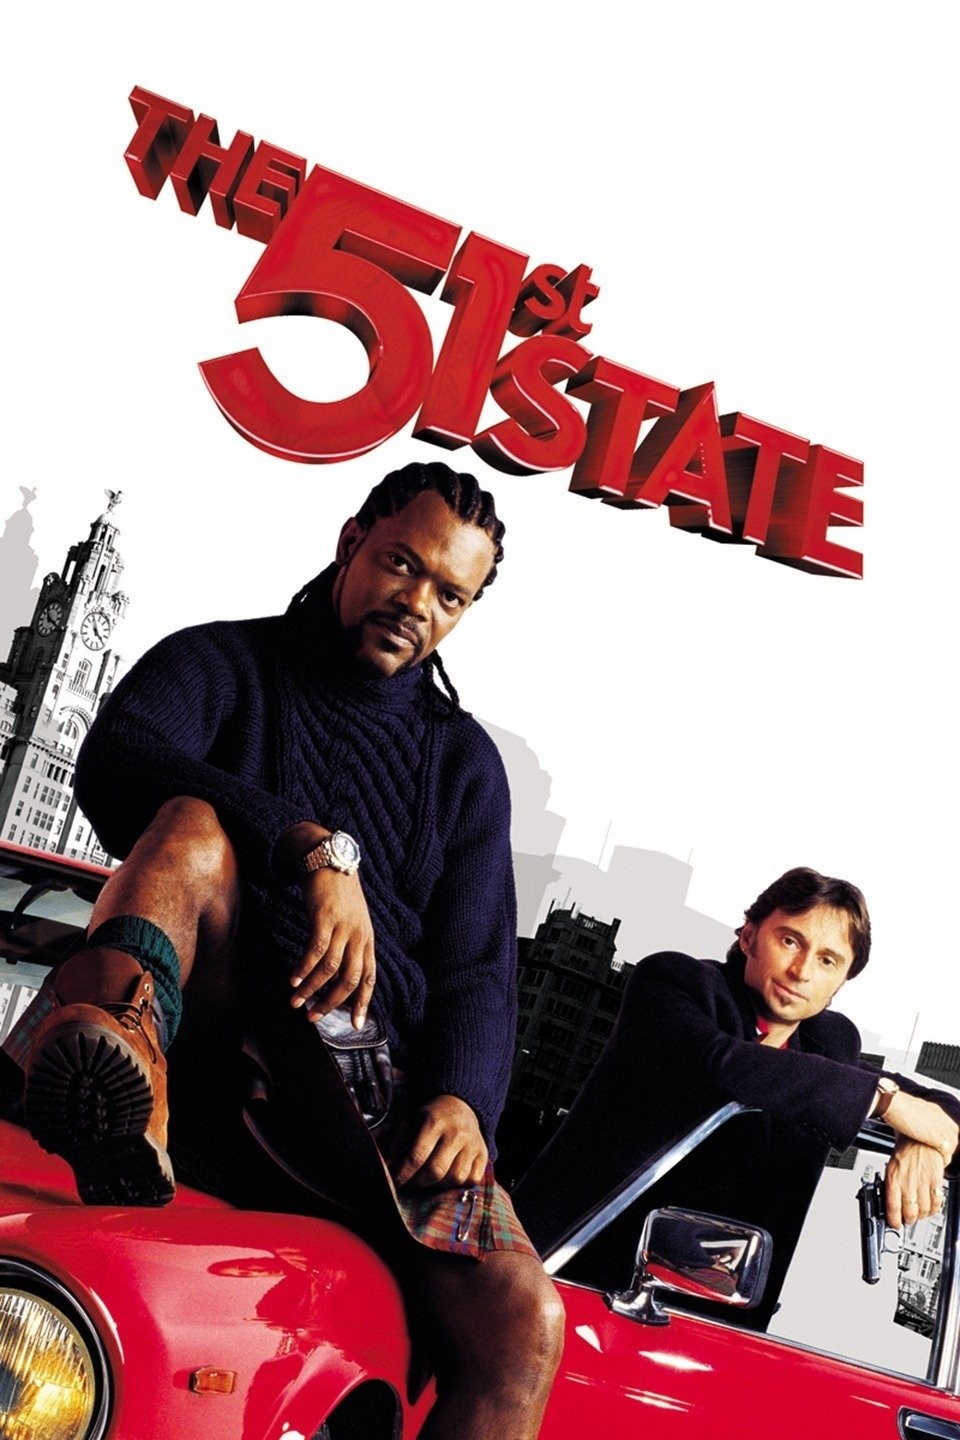 MOVIE REVIEW: 'State of Play' – 3.5 stars